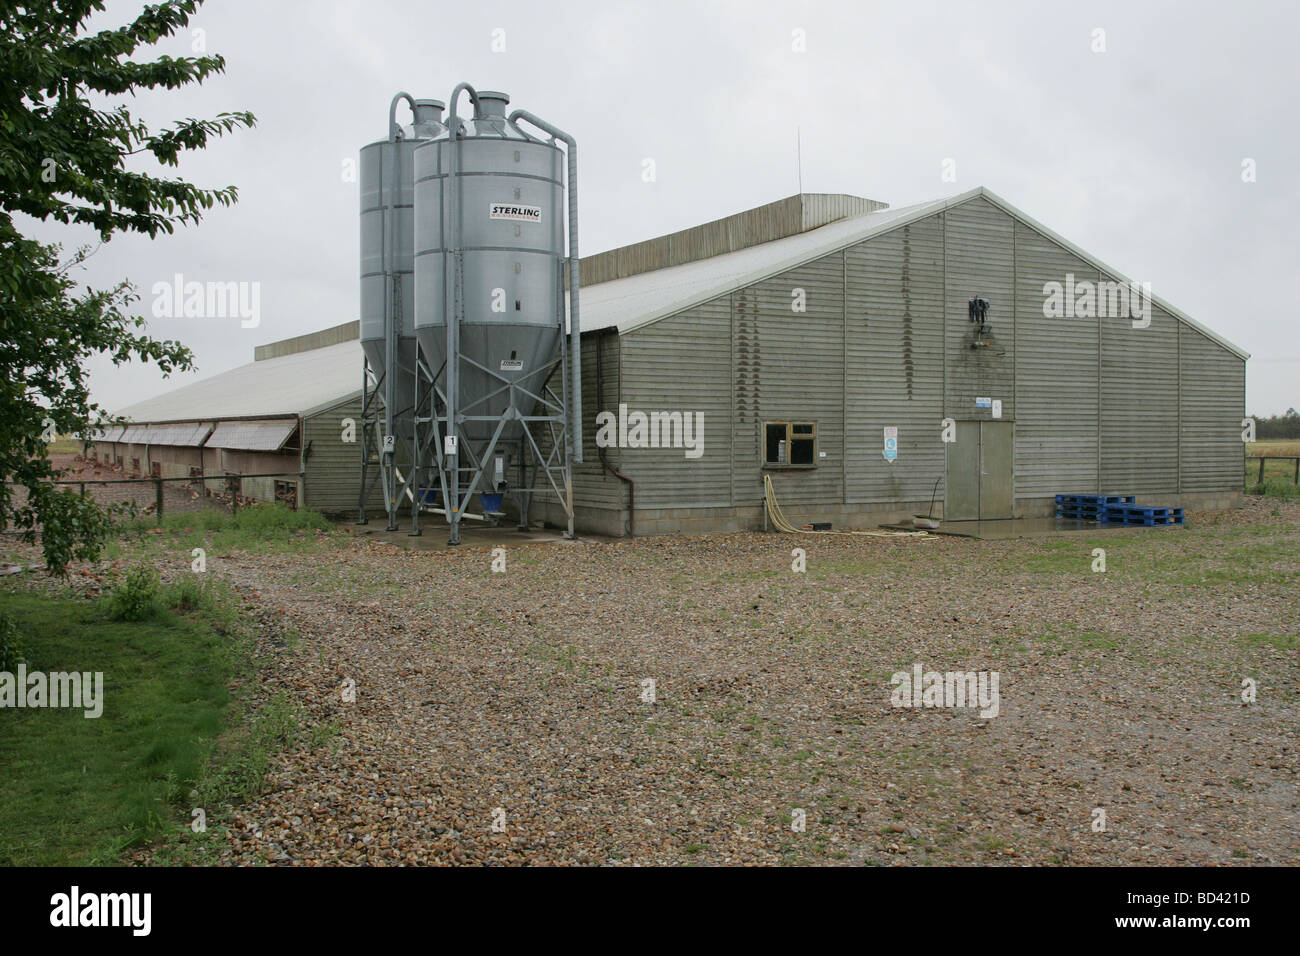 Poultry Shed With Feed Bins Stock Photo